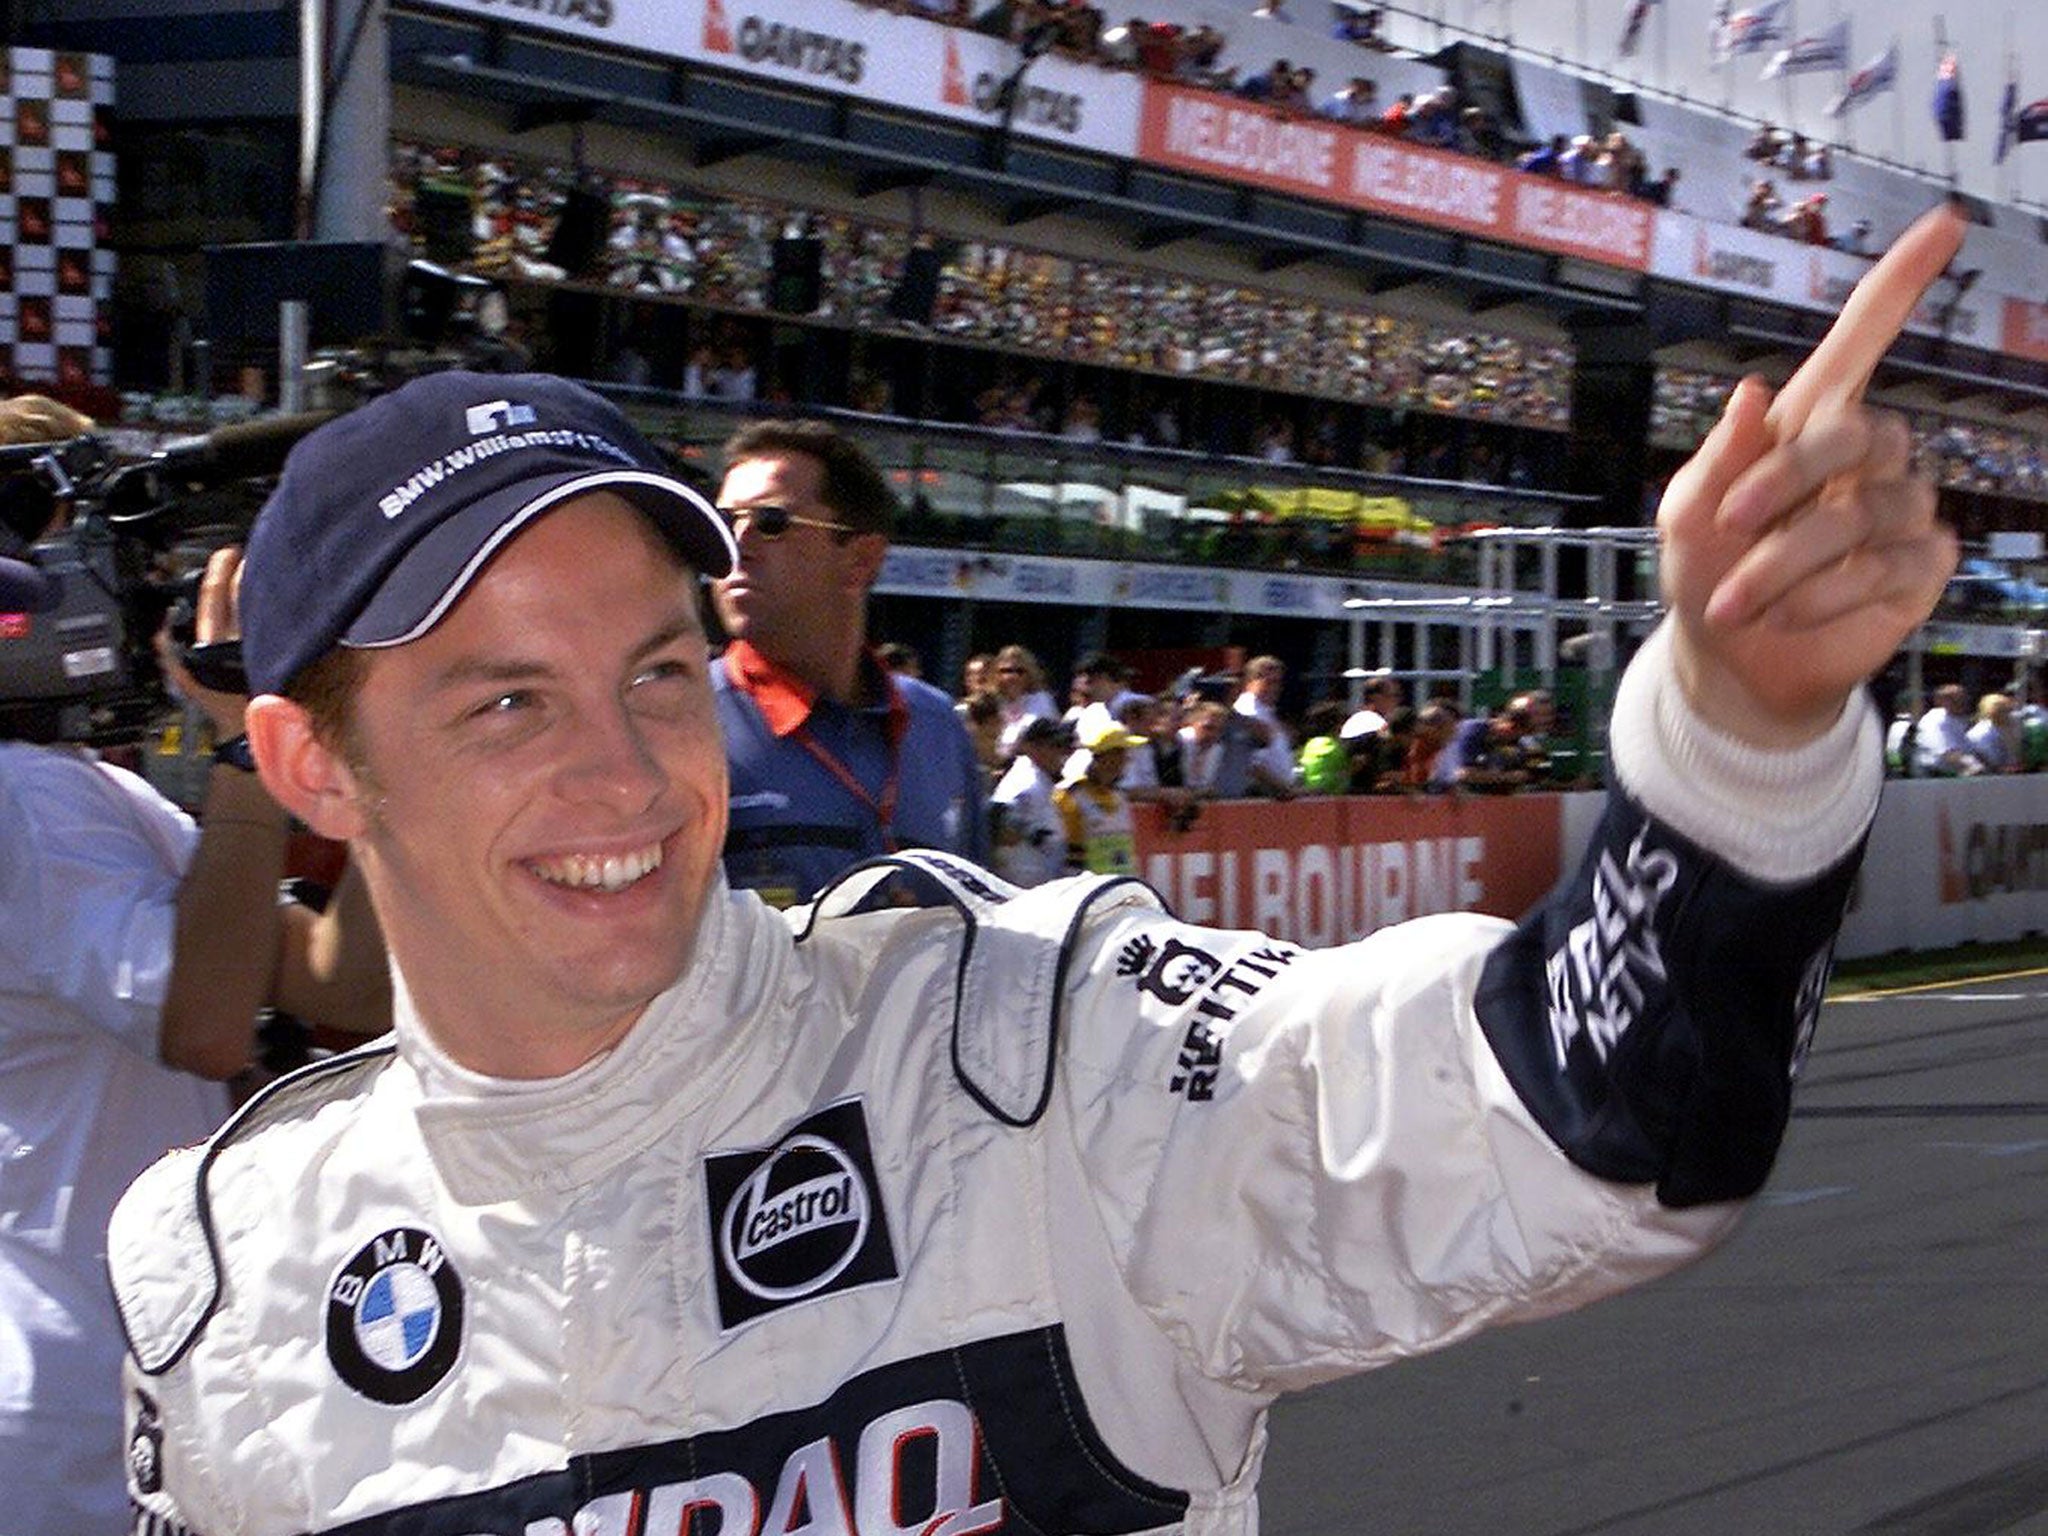 Button made his debut aged 20 in the 2000 Australian Grand Prix